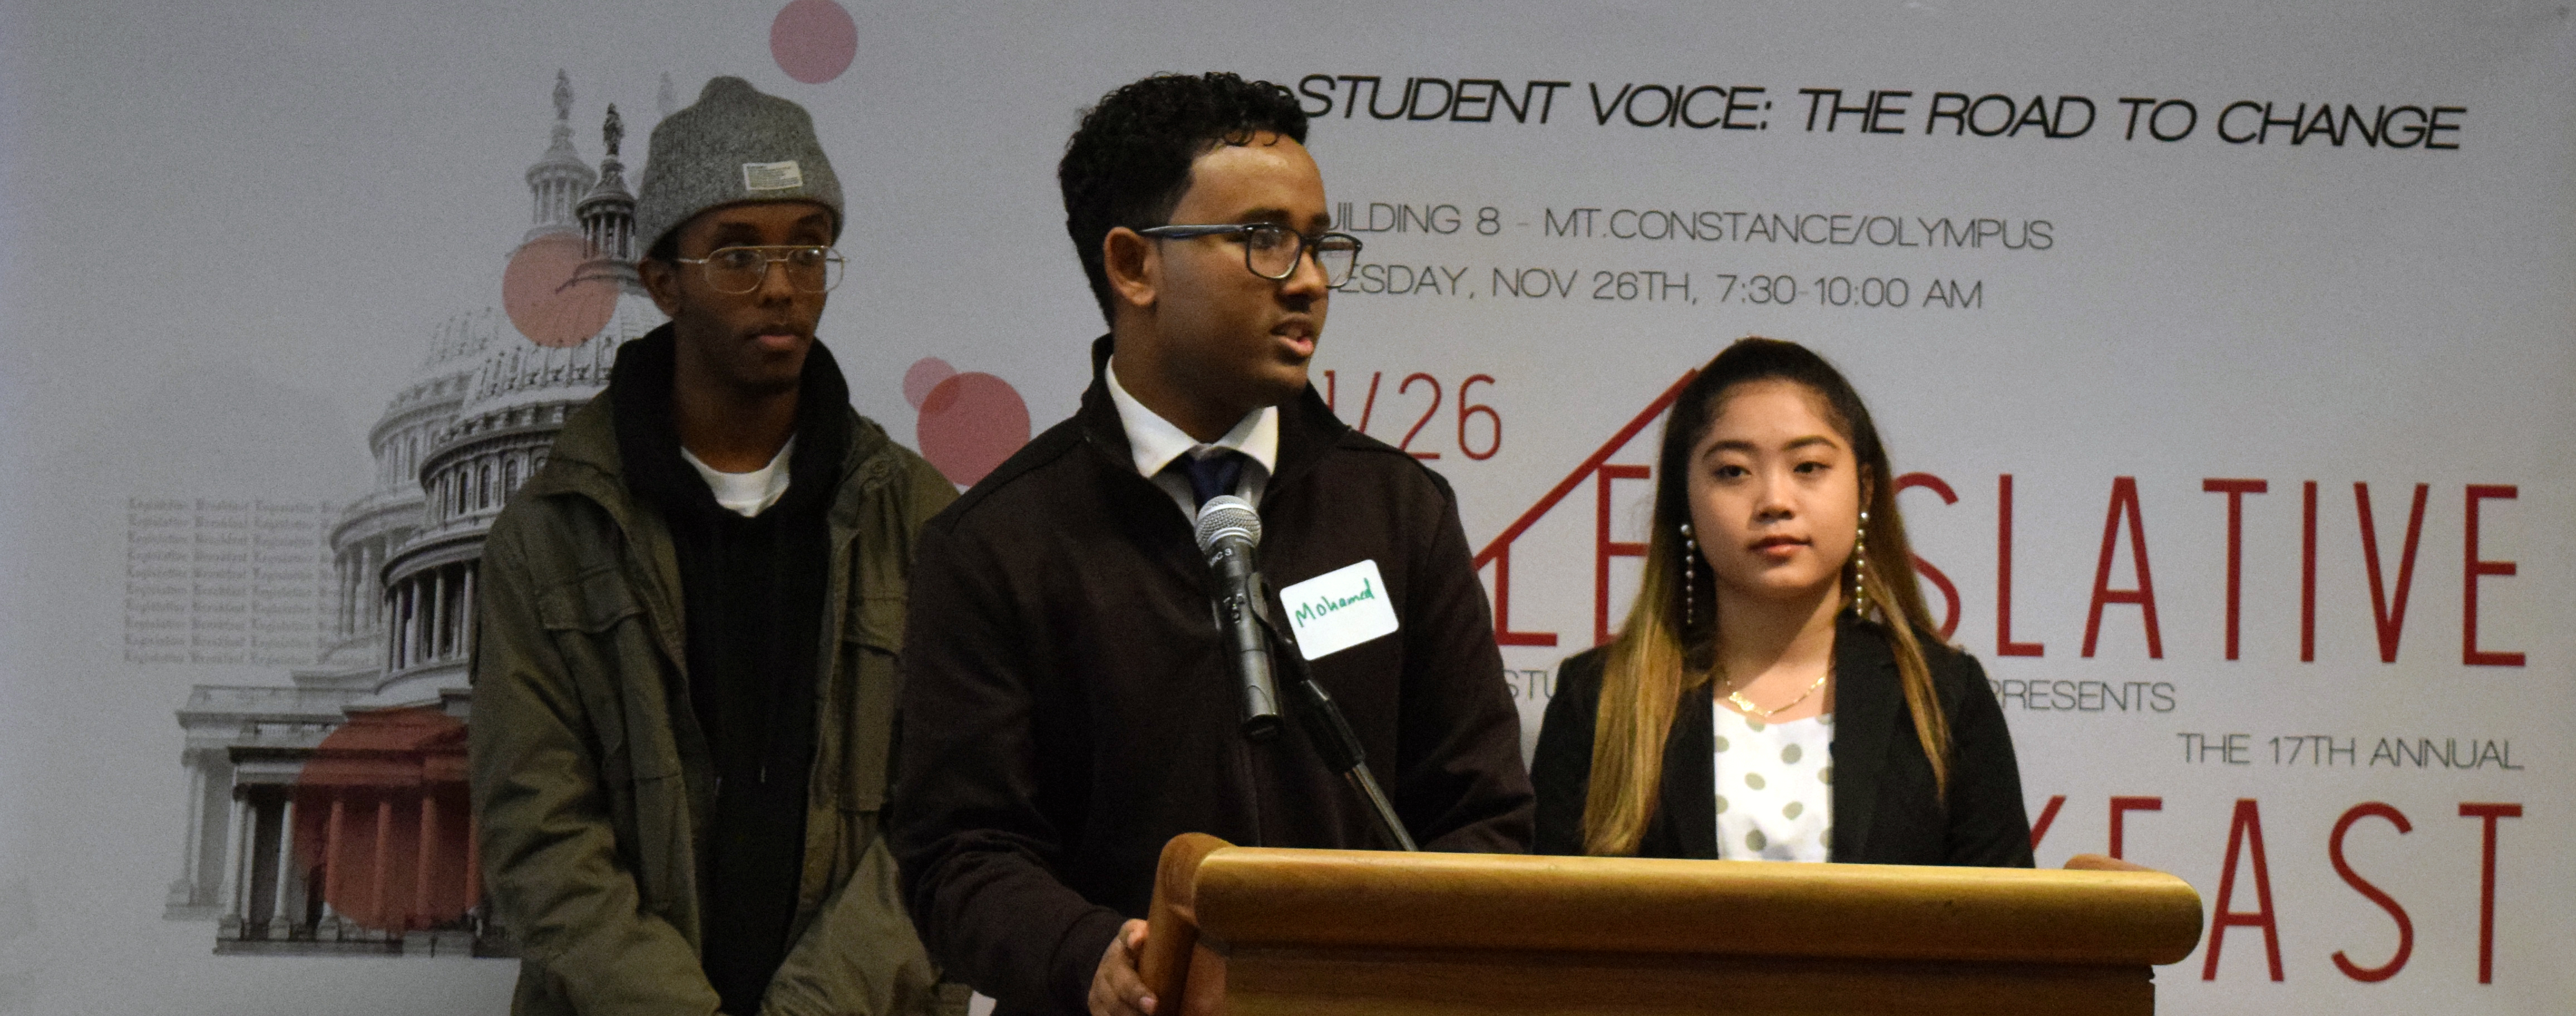 Student government leaders stand at a podium with "Legislative Breakfast" banner behind them